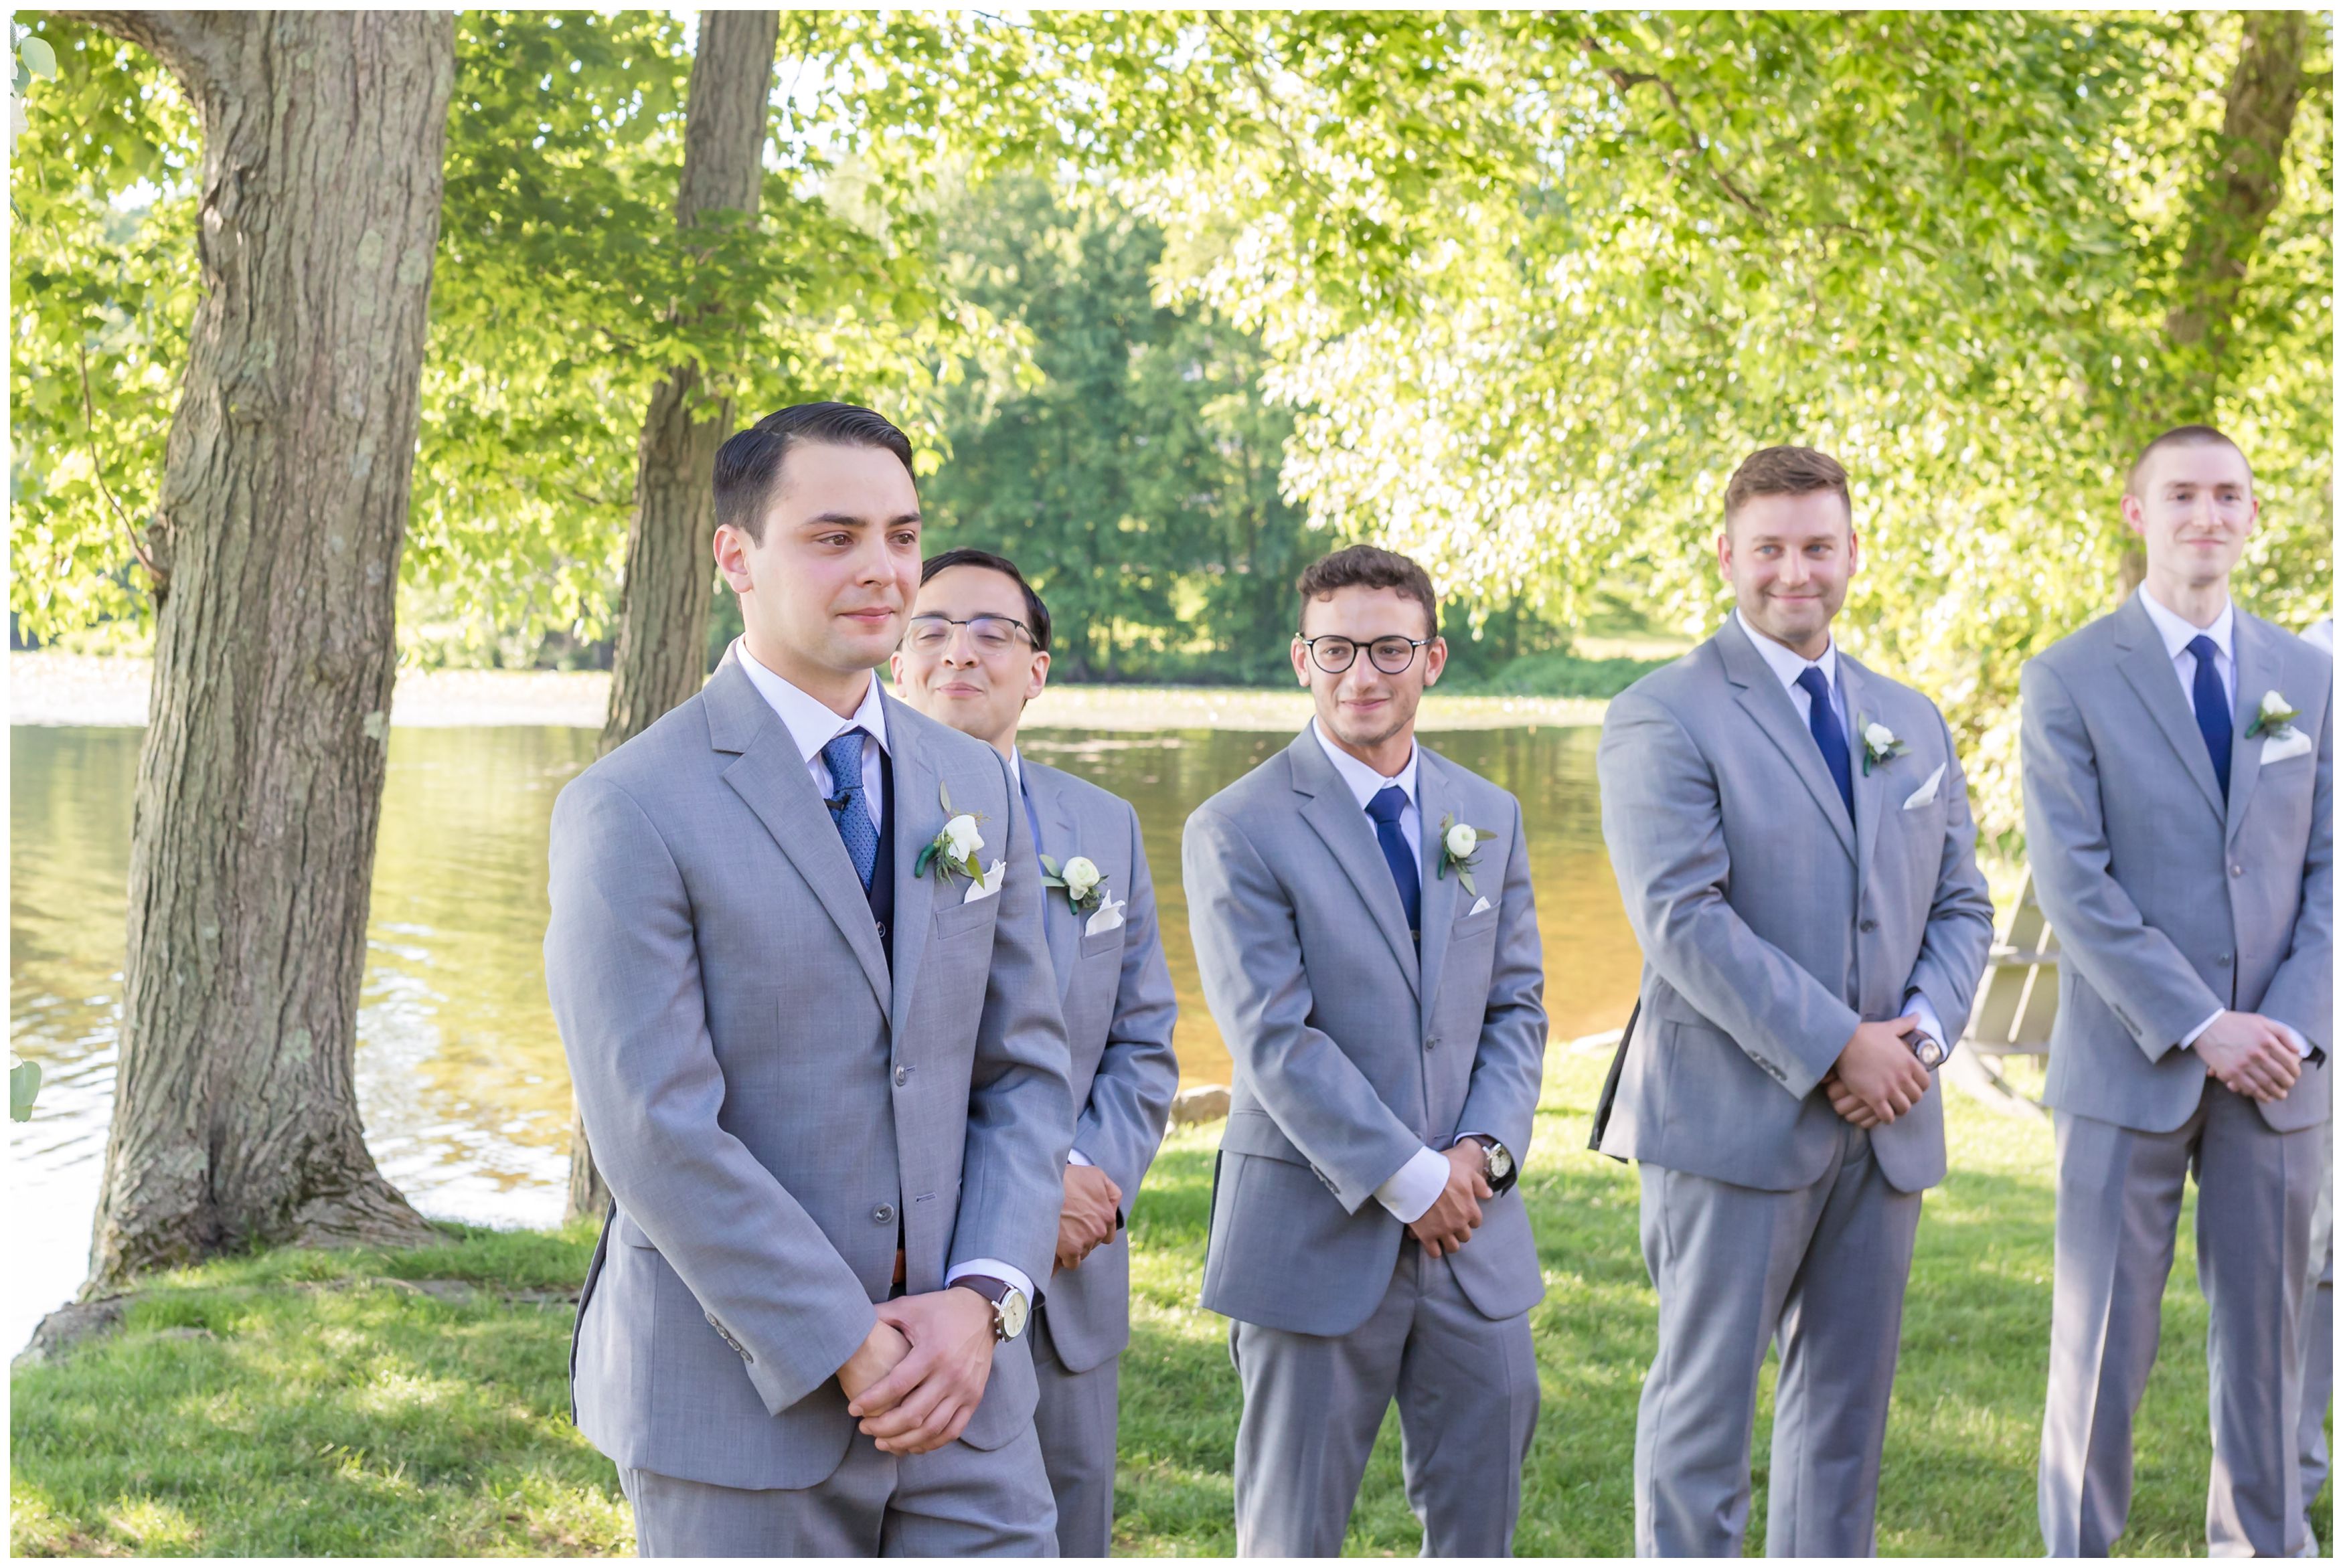 Emotional groom at outdoor lakeside ceremony